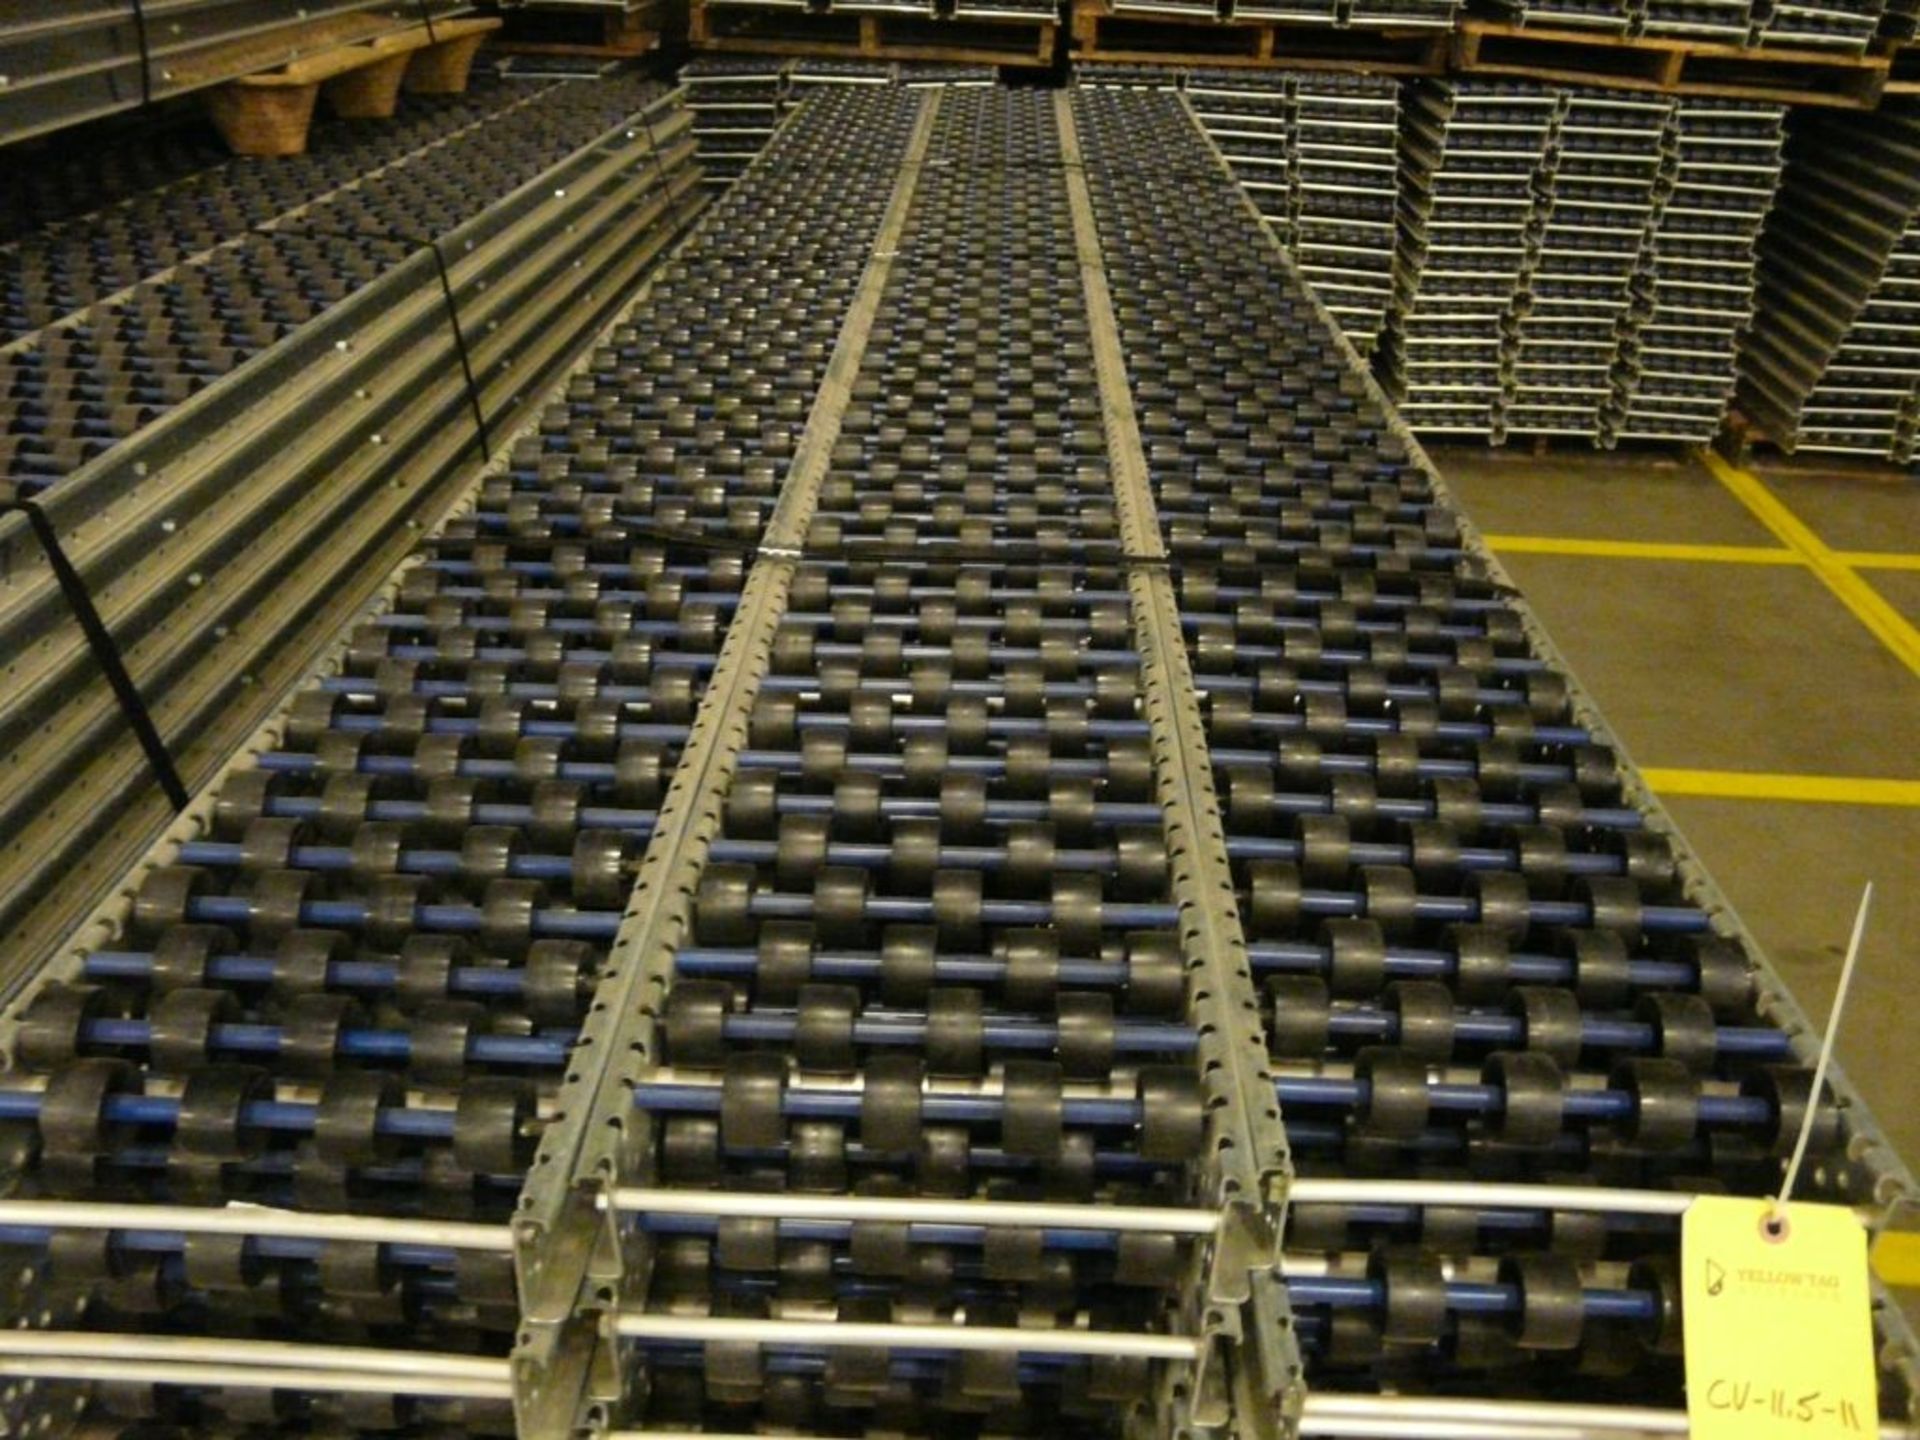 Lot of (90) SpanTrack Wheelbed Carton Flow Conveyors - 11.5'L x 11"W; Tag: 223573 - $30 Lot - Image 3 of 4